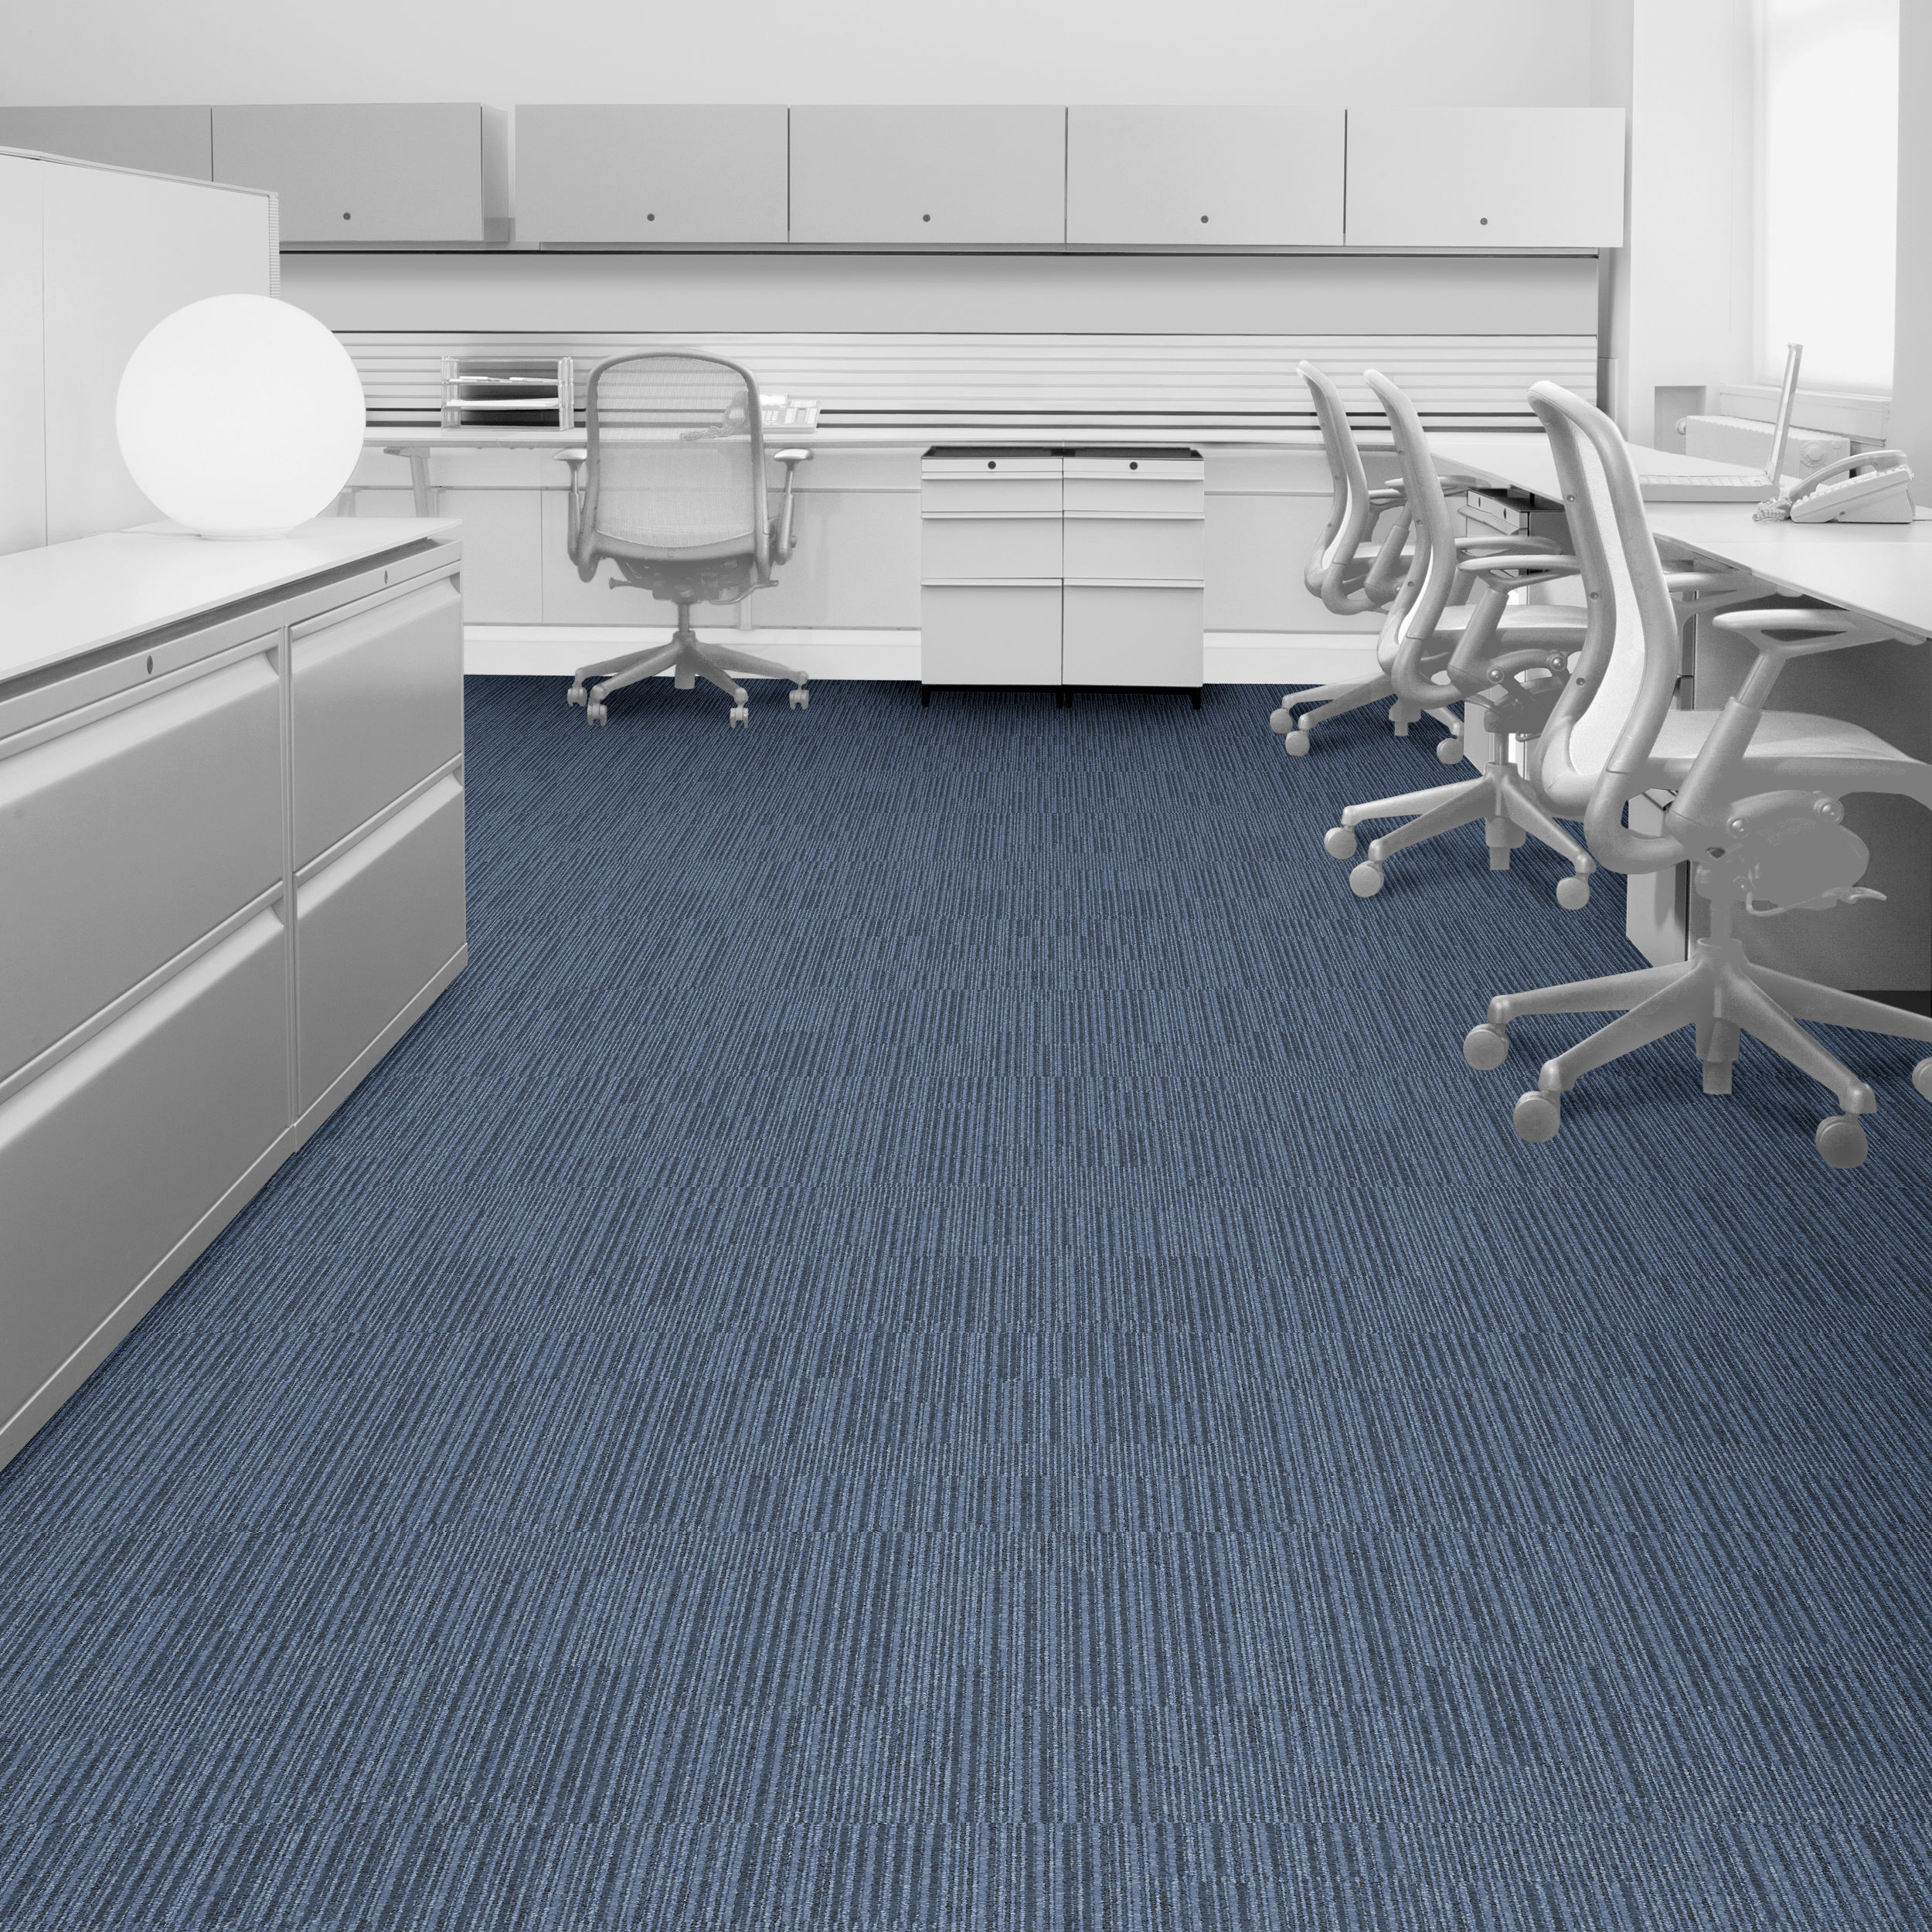 Interface Equilibrium Serenity Carpet Tile in office setting.